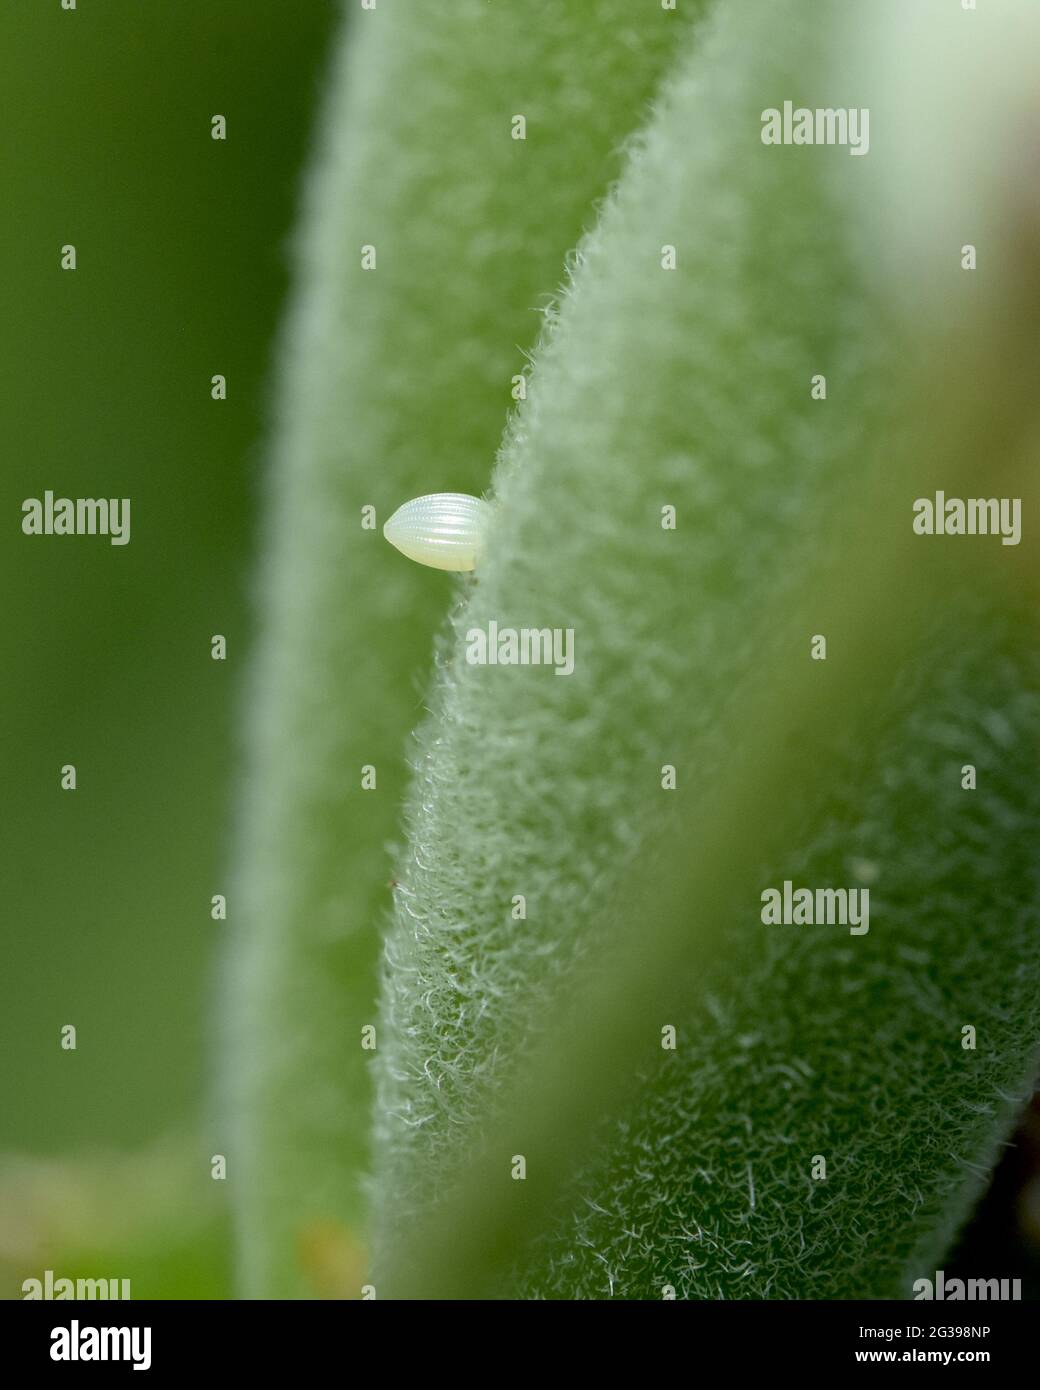 Closeup of a small translucent white Monarch egg (Danaus plexippus) deposited on a seed pod of Butterfly weed (Asclepias tuberosa.) Stock Photo